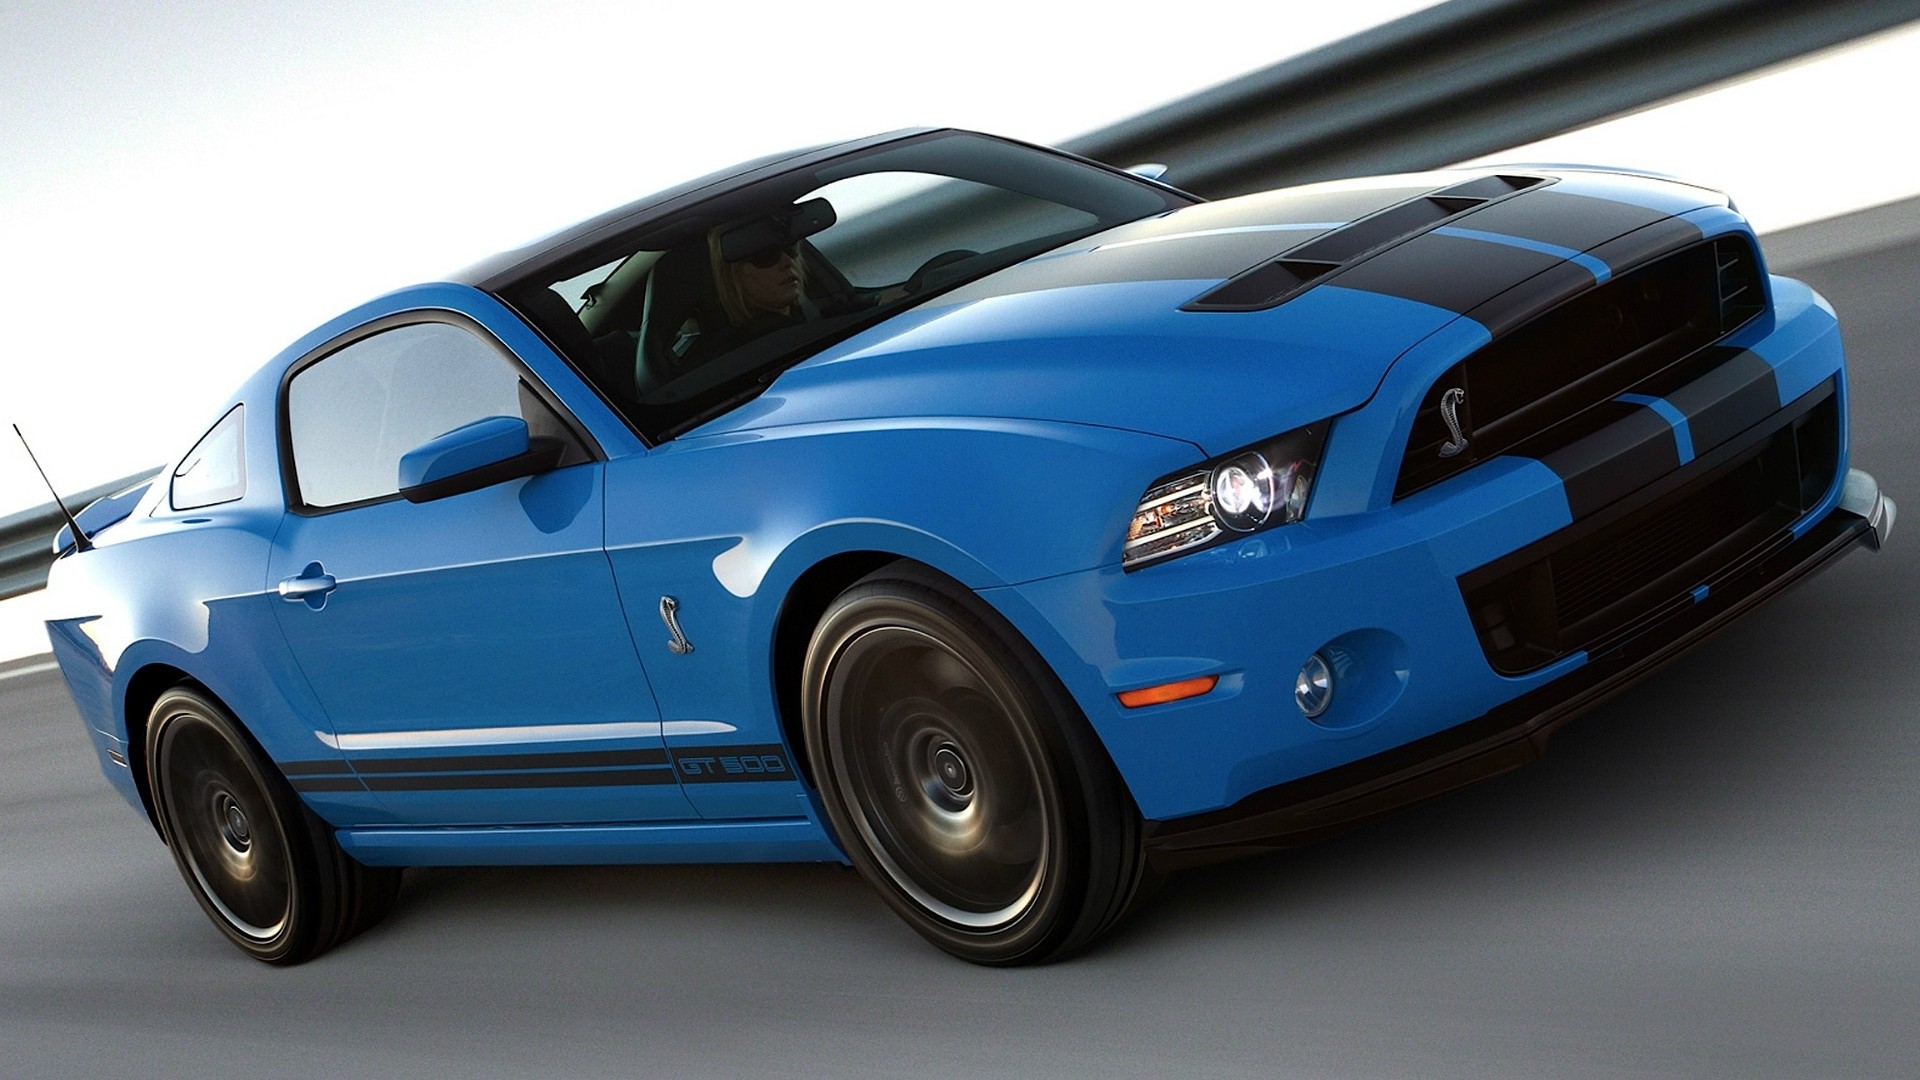 Ford Mustang Shelby Gt500 HD Wallpaper